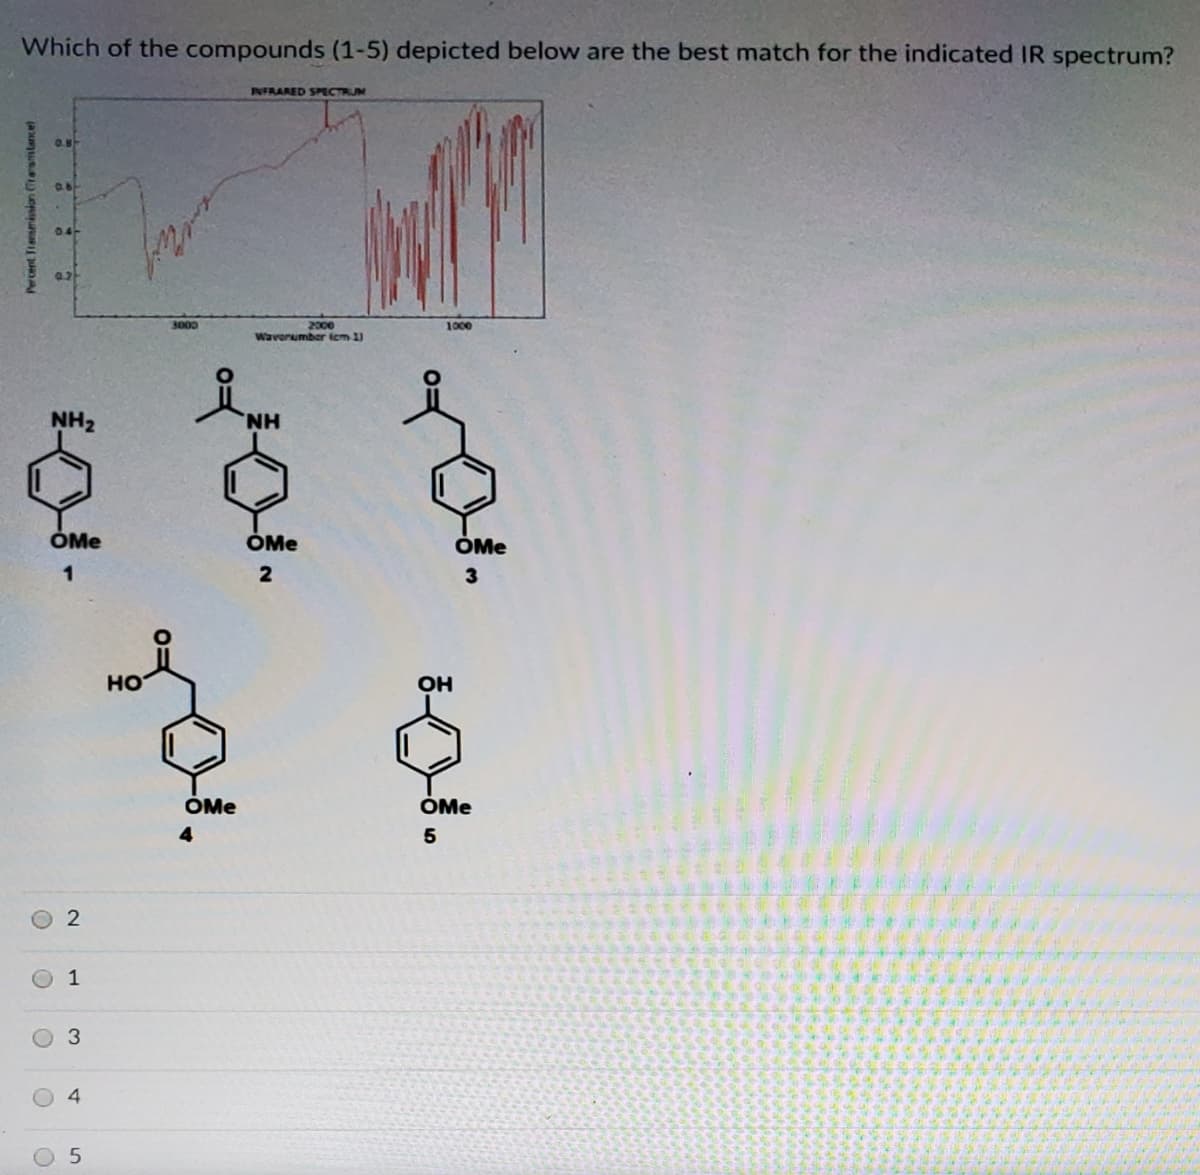 Which of the compounds (1-5) depicted below are the best match for the indicated IR spectrum?
INFRARED SPECTRUM
3000
2000
Waverumber iem 1)
1000
NH2
NH
ÓMe
ÓMe
ÓMe
2
но
OH
OMe
OMe
5
2
1
Оз
4
5
